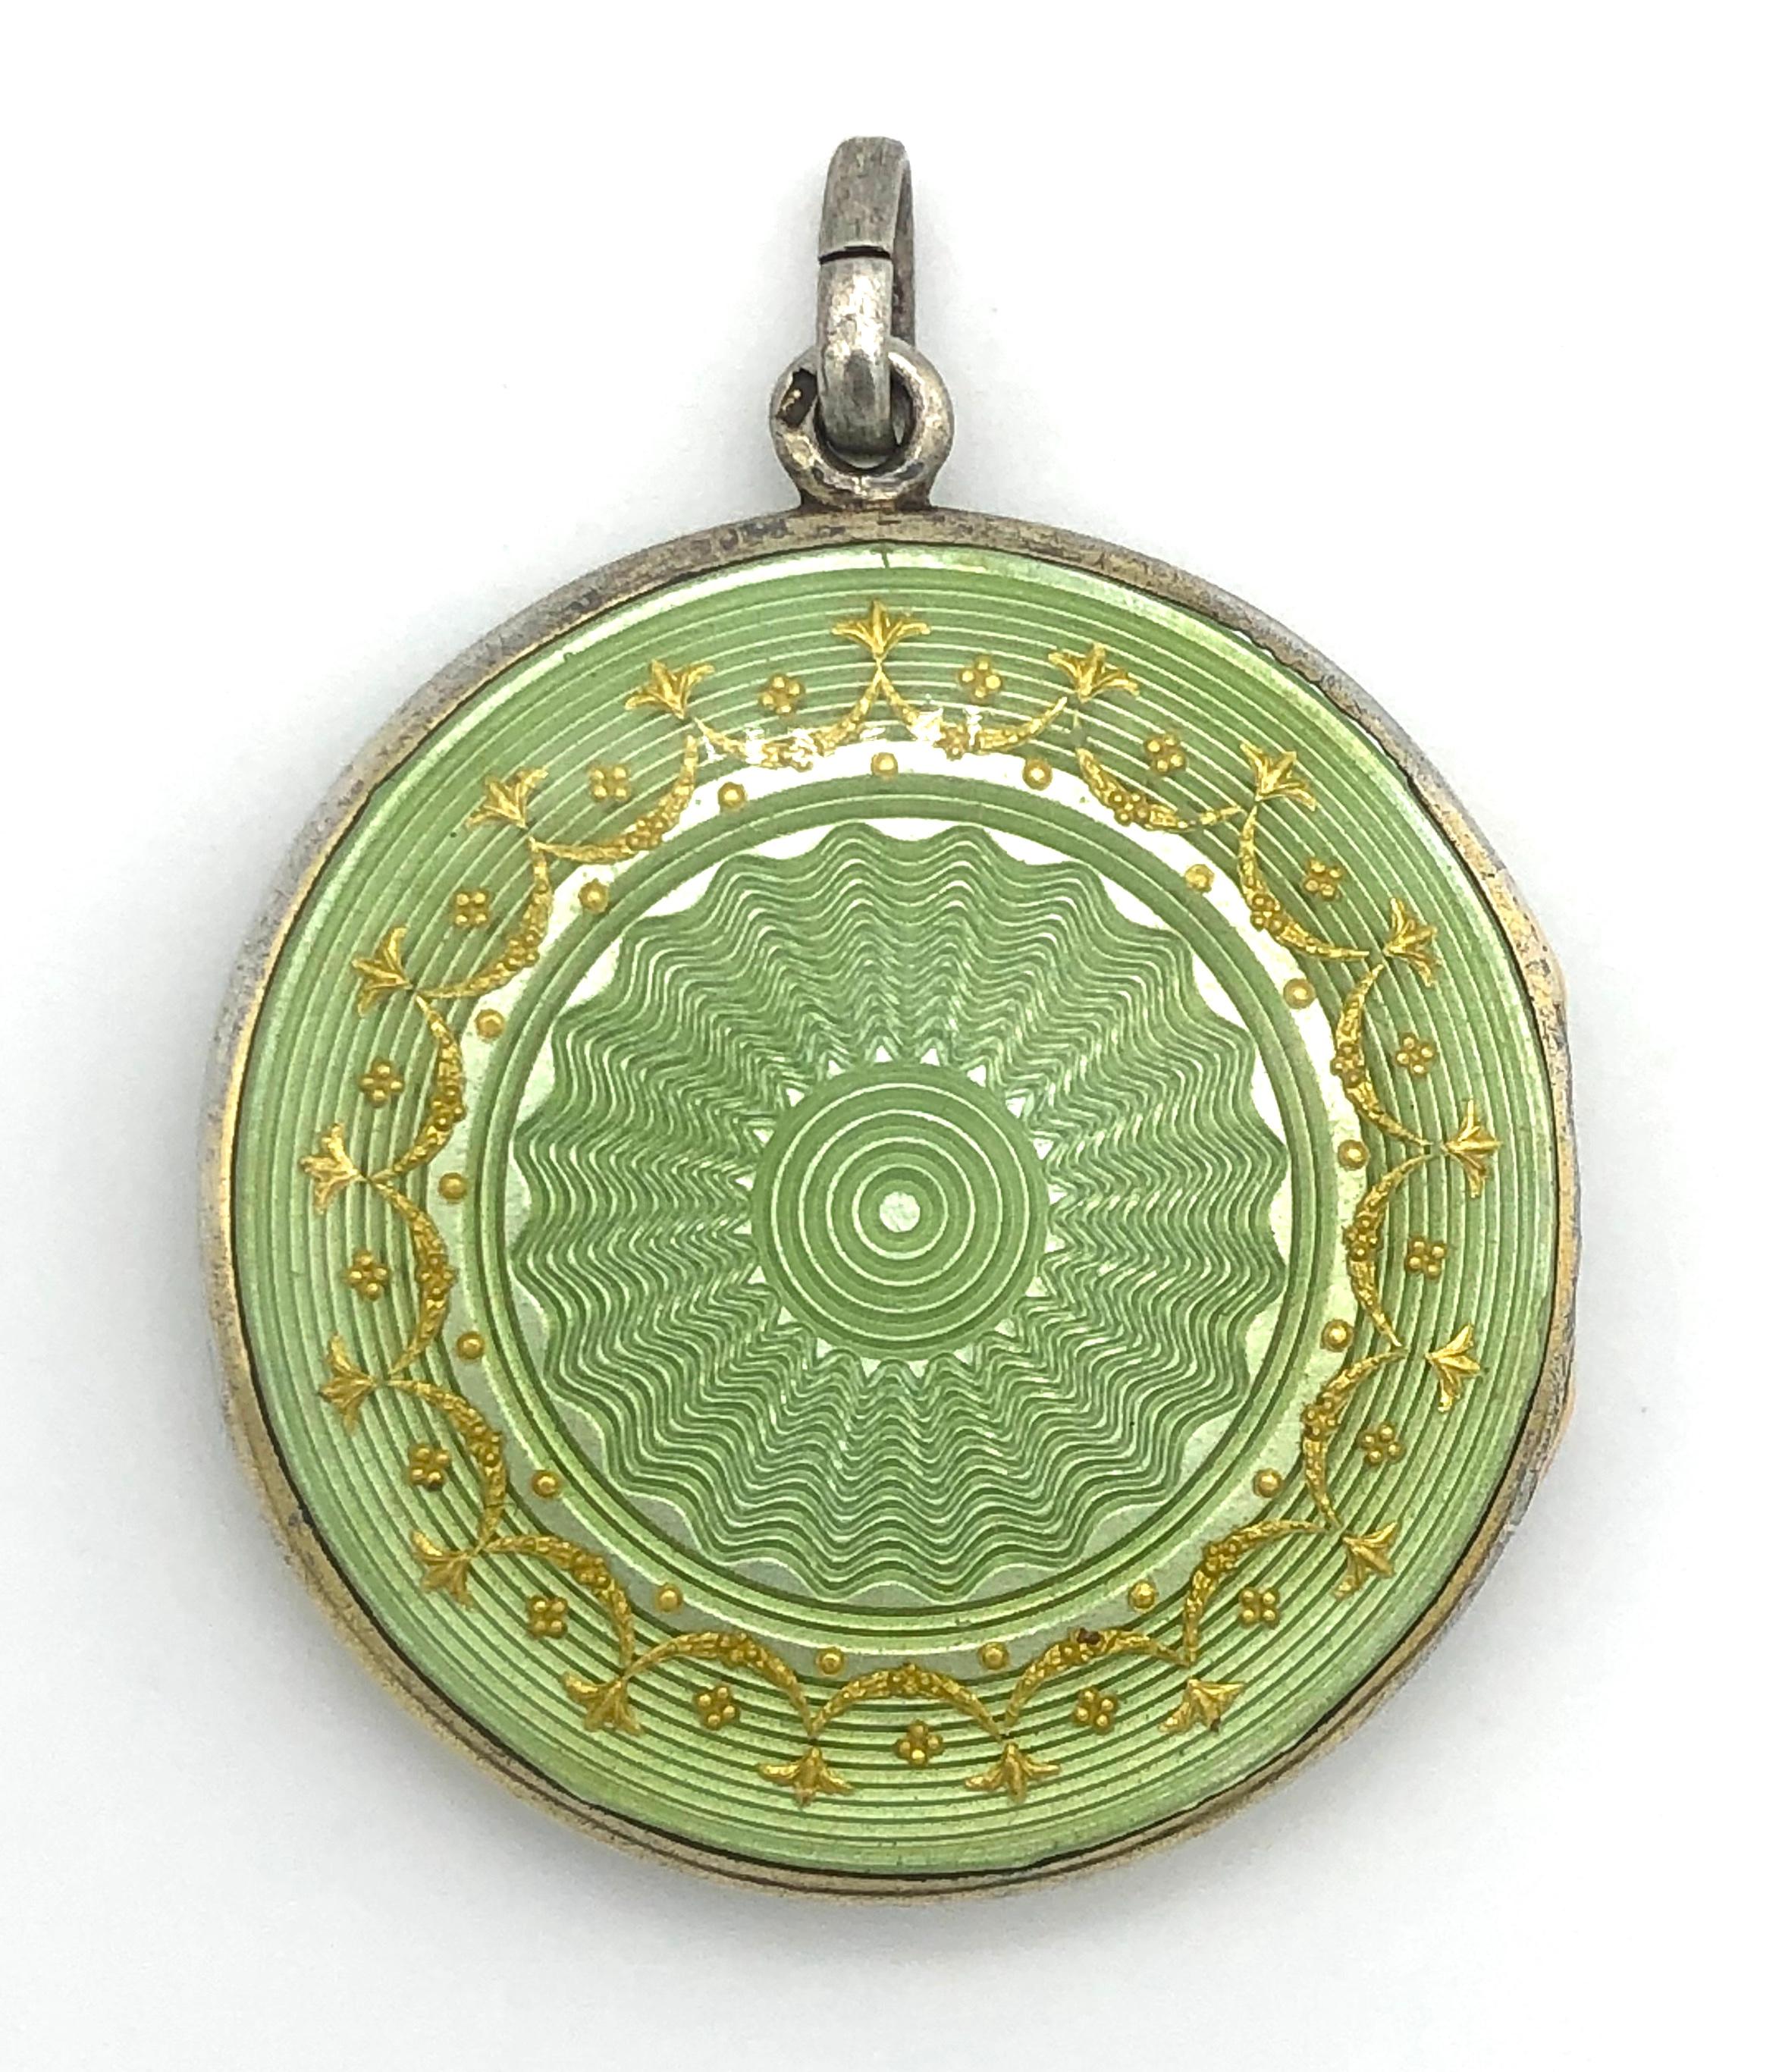 The silver locket is decorated with light green guilloché- enamel and embellished with gold enamel back and front. It is guilt on the Inside and holds the picture of a little girl.